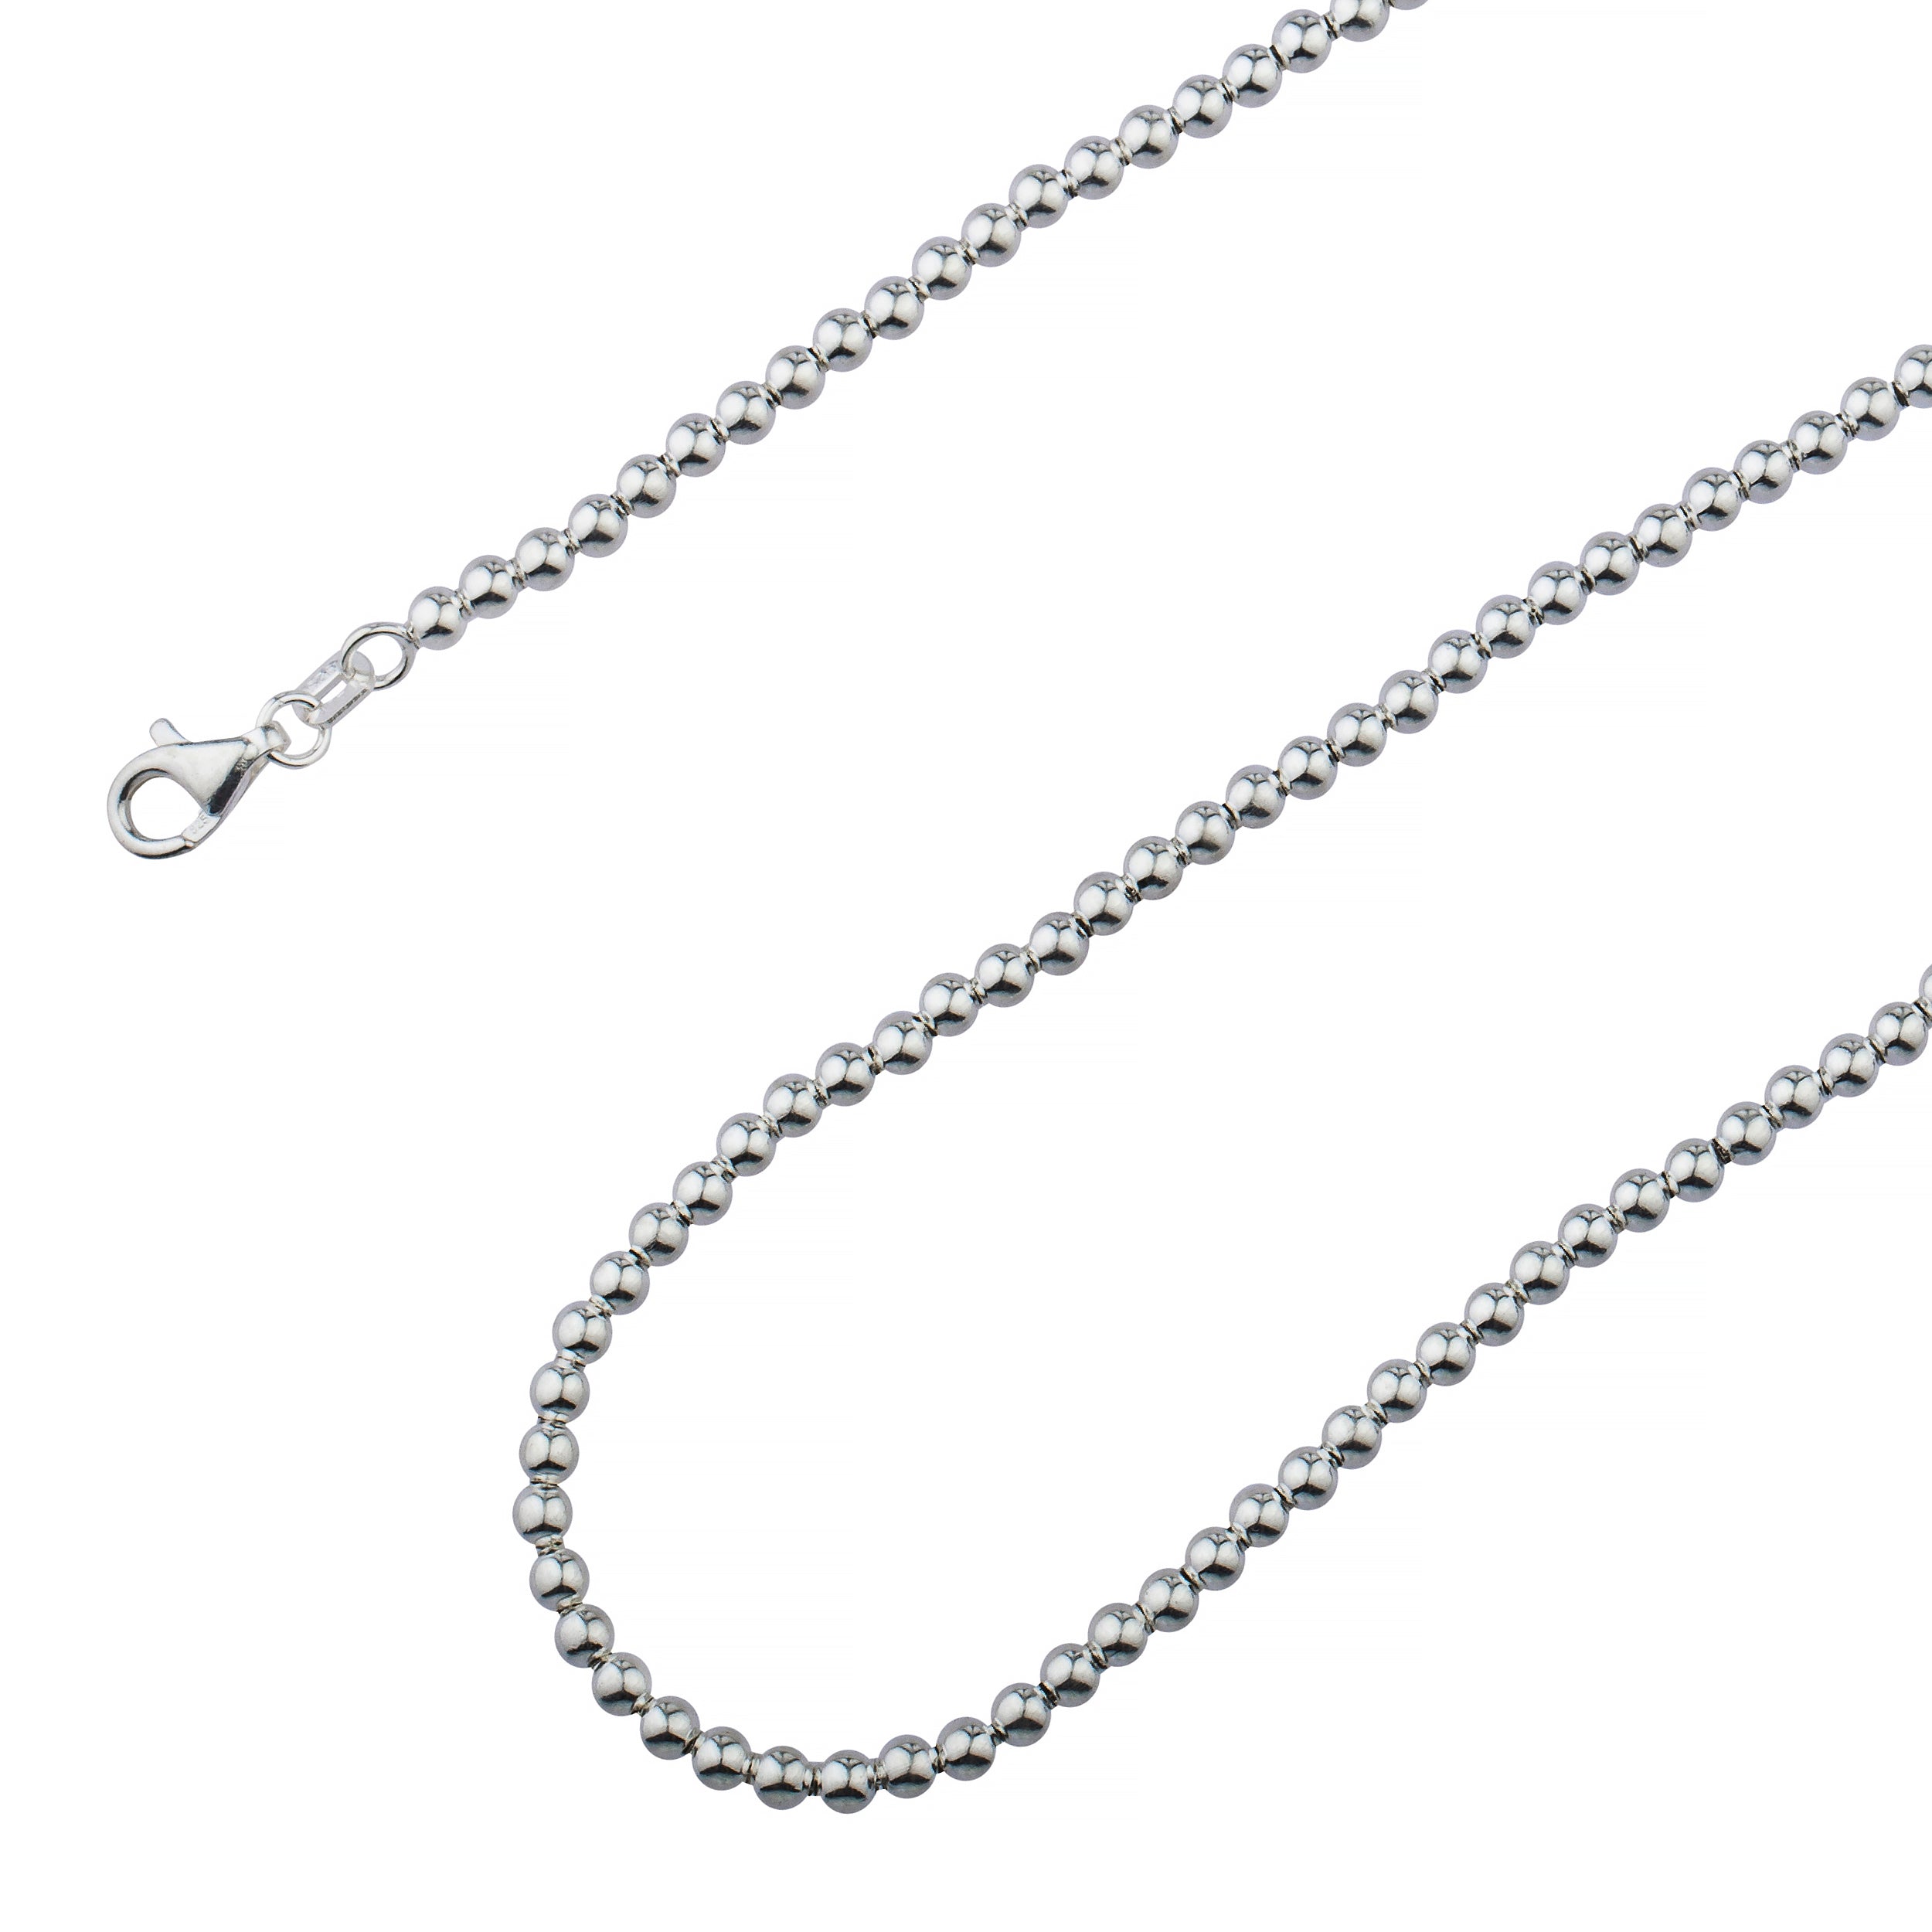 Sterling Silver Beaded Chain 3mm Beads 20 inch Necklace Chain